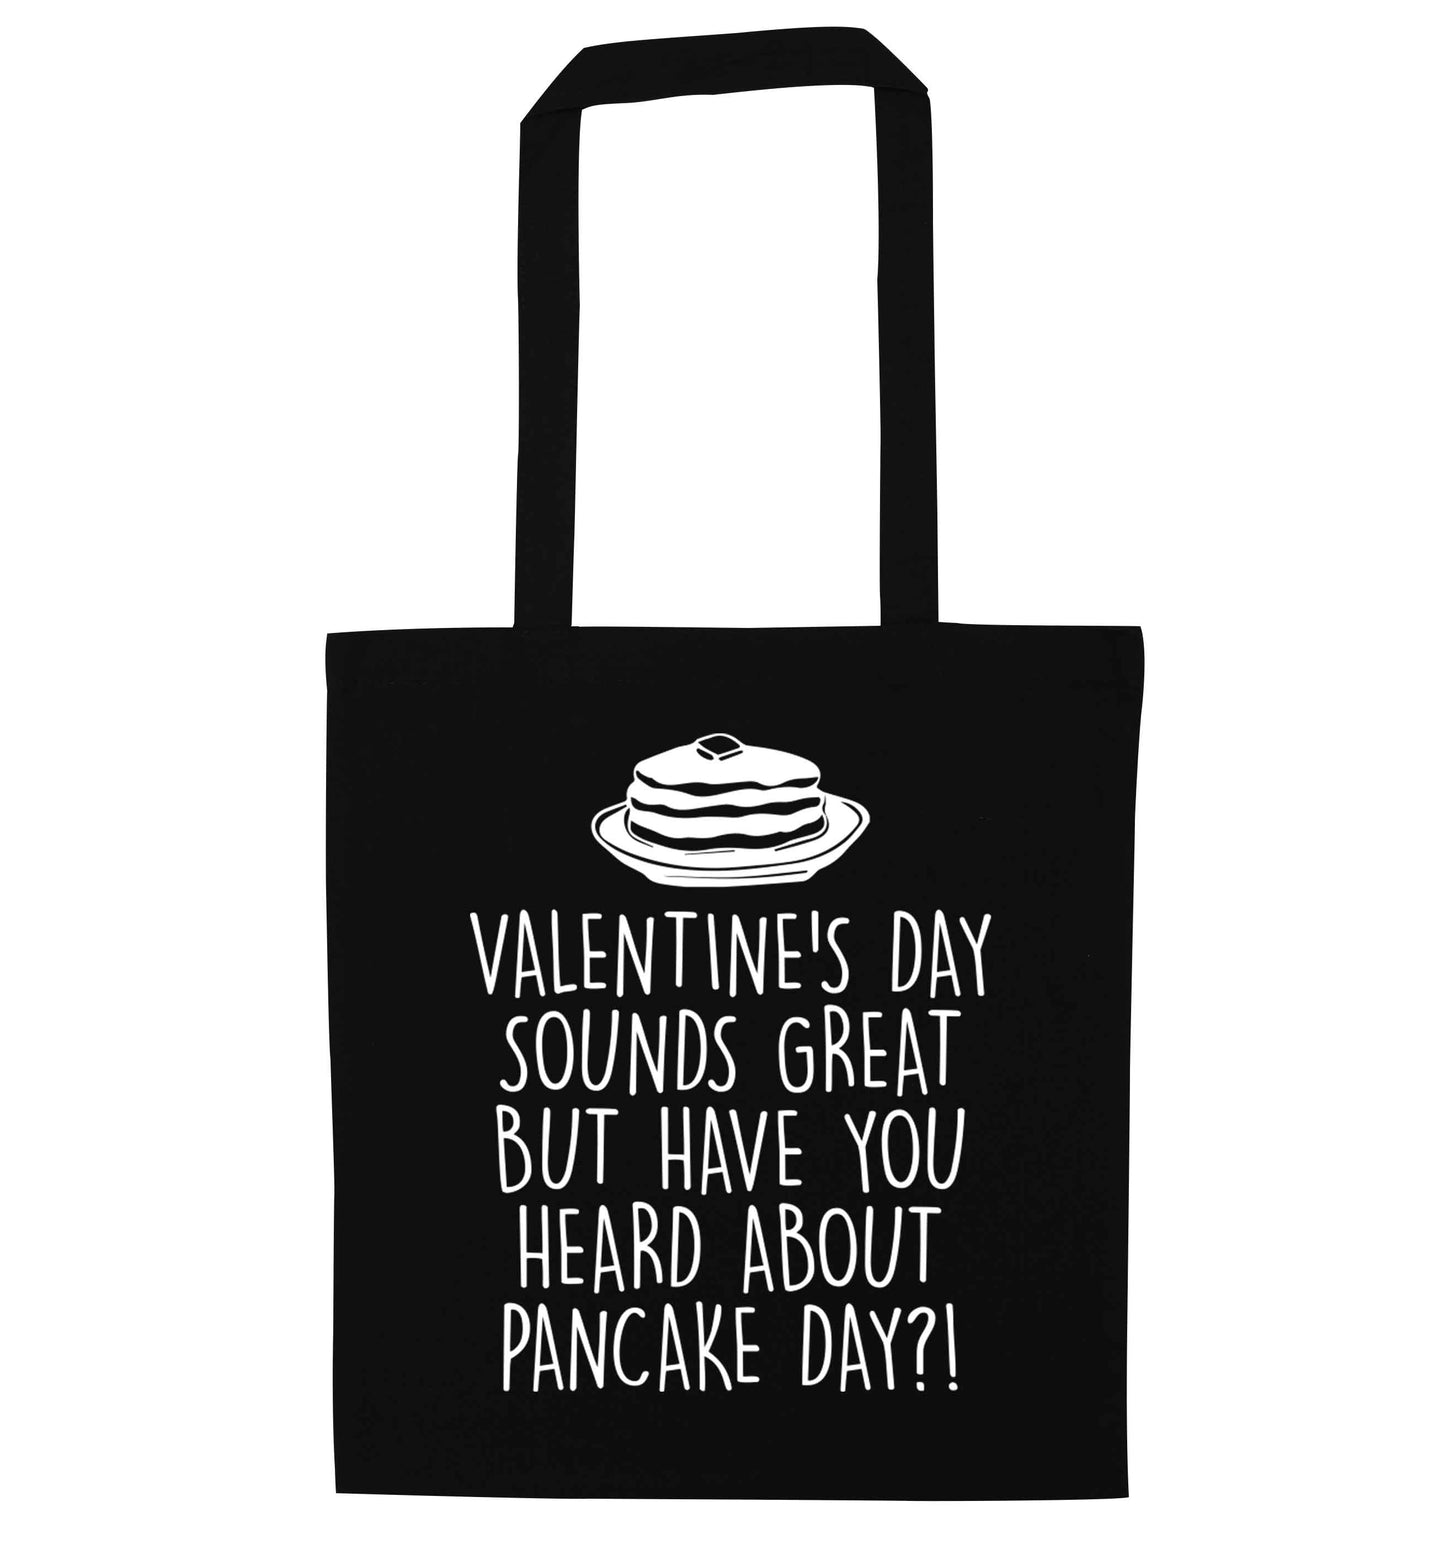 Valentine's day sounds great but have you heard about pancake day?! black tote bag